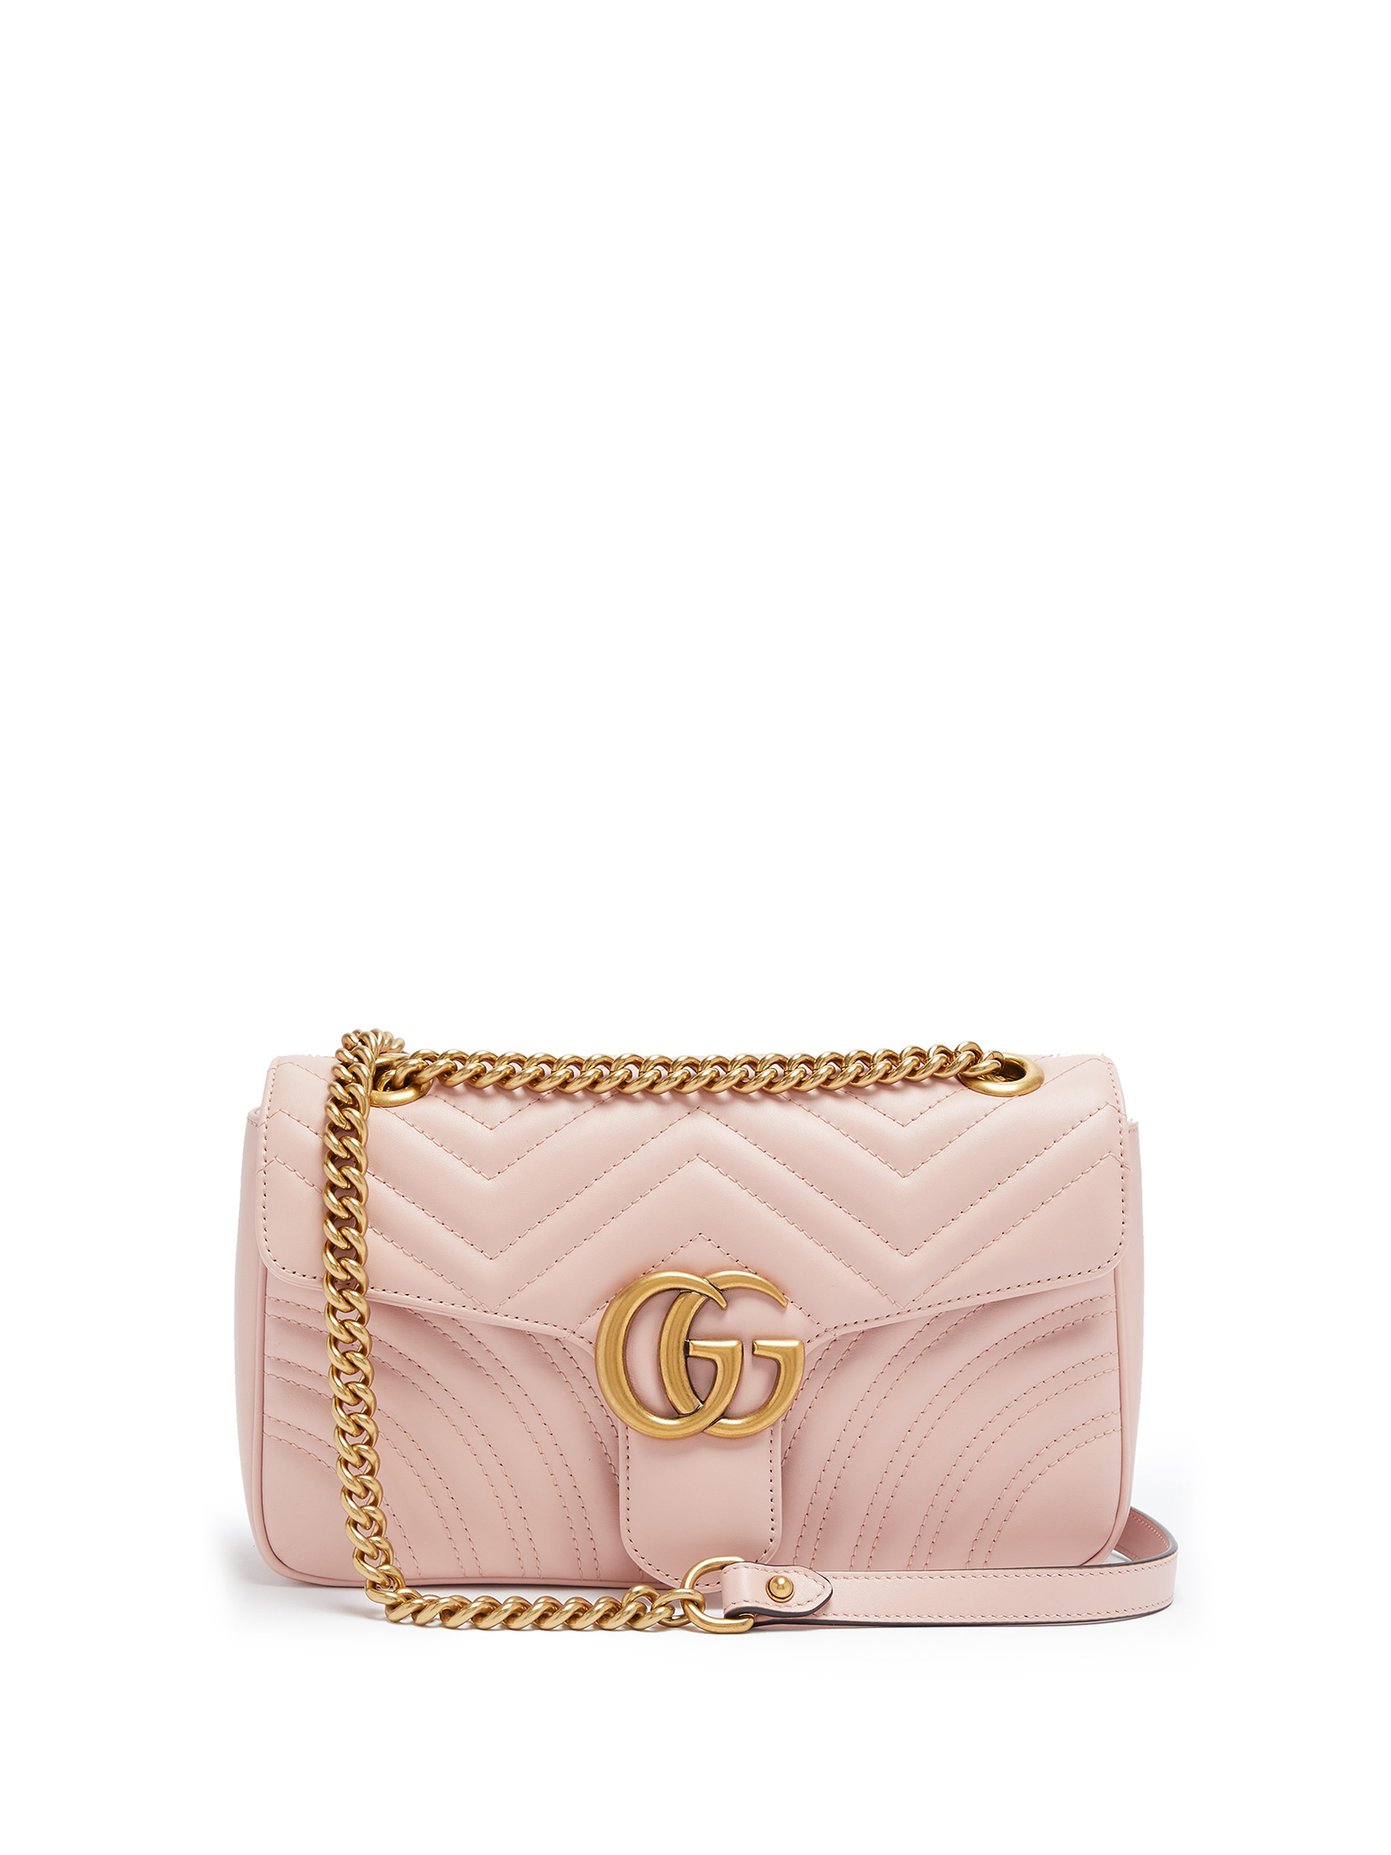 gucci pink bag marmont